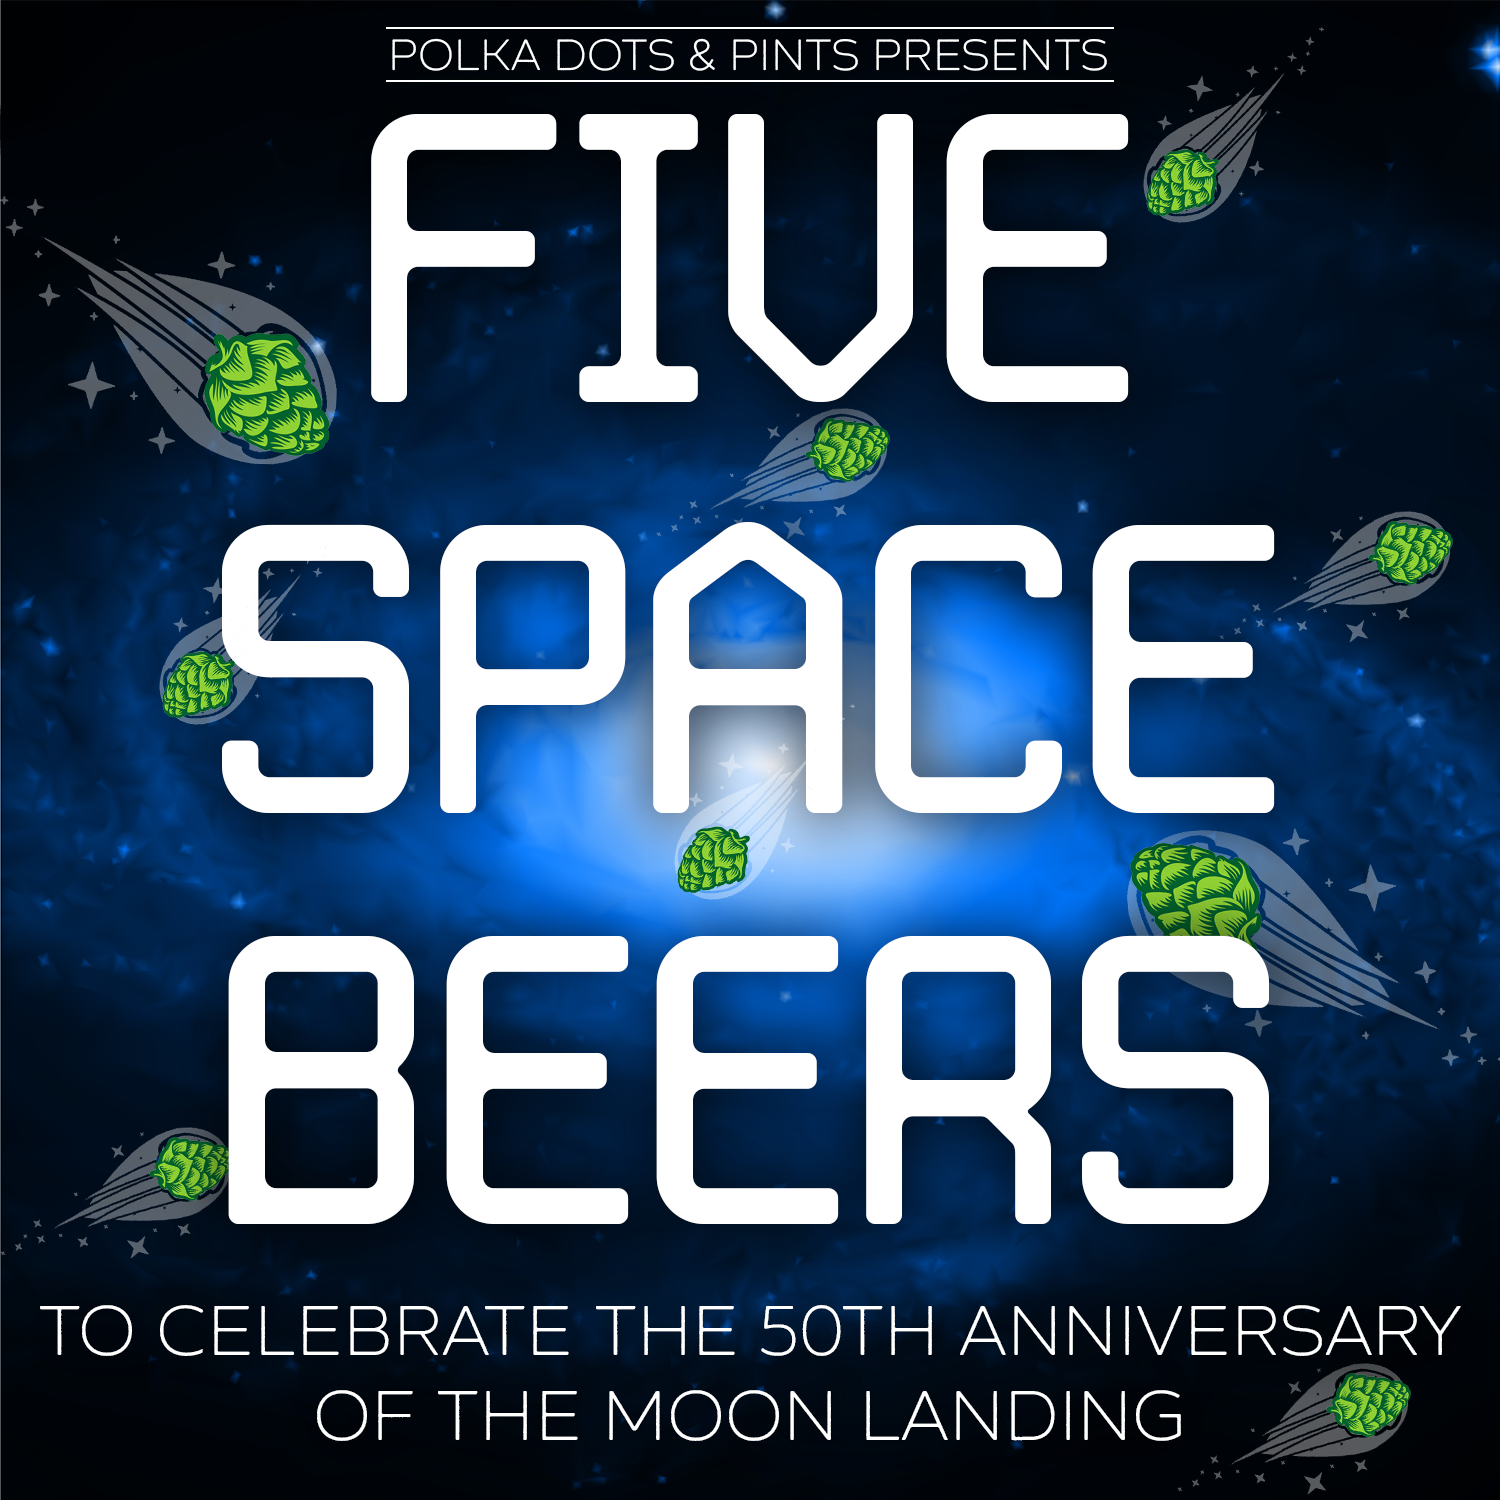 A spiral galaxy in the background with comets made from beer hops in the background and text that reads "Polka Dots & Pints presents 5 Space Beers to Celebrate the 50th Anniversary of the Moon Landing"